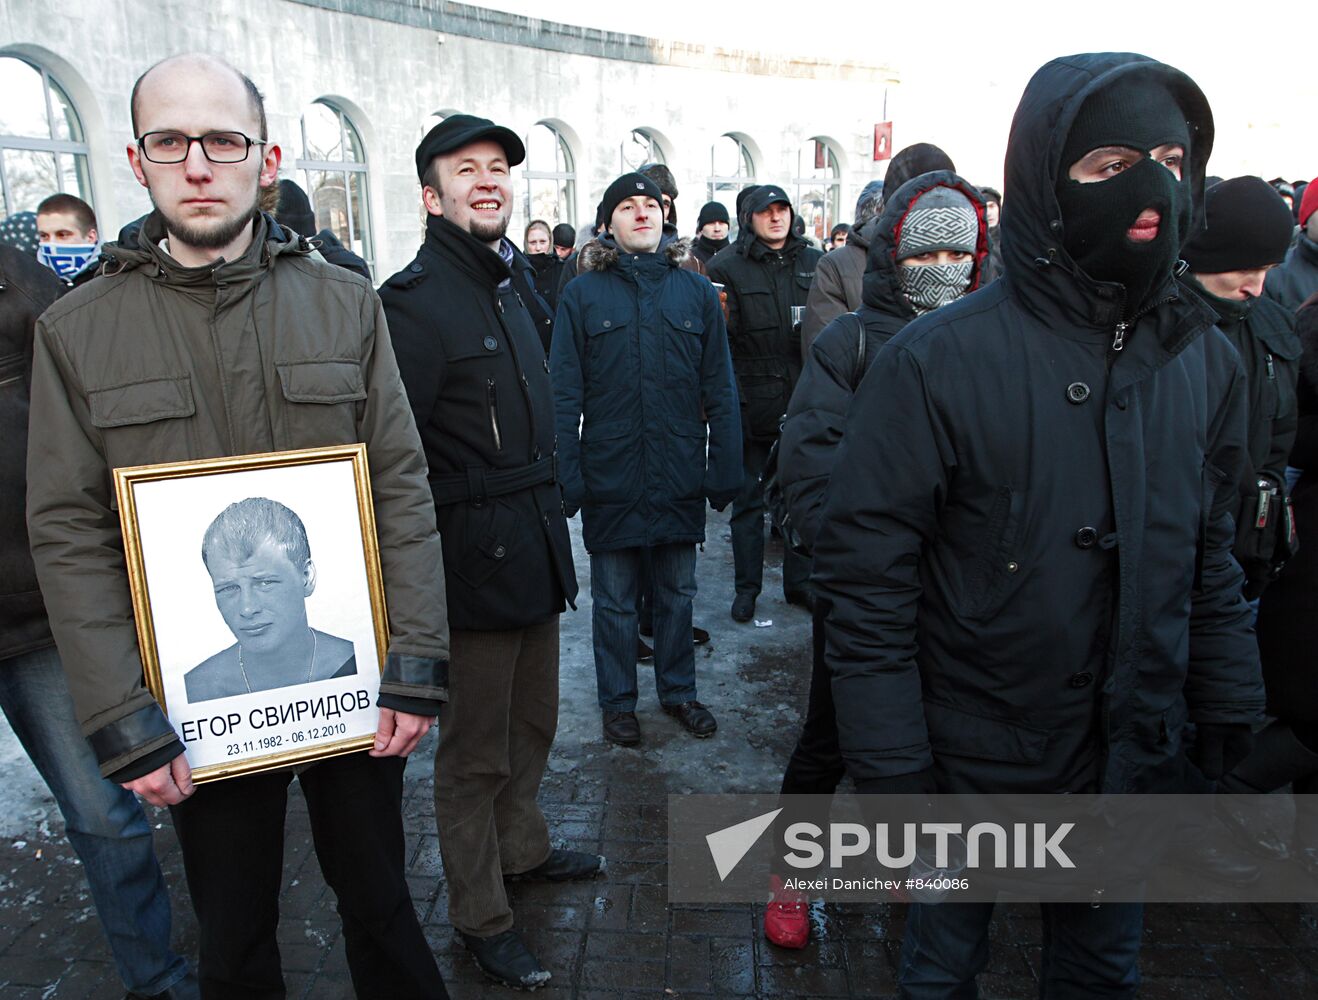 St. Petersburg rally protests ethnic crimes